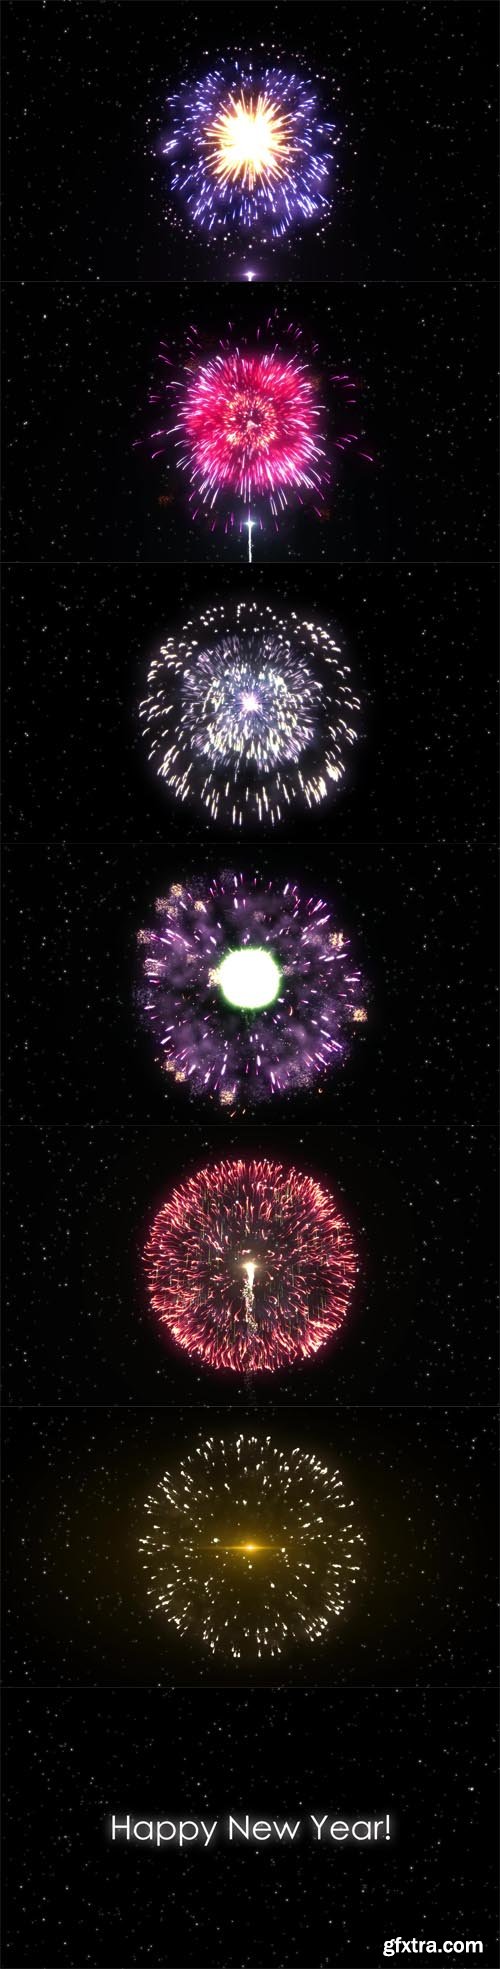 Fireworks in the New Year night